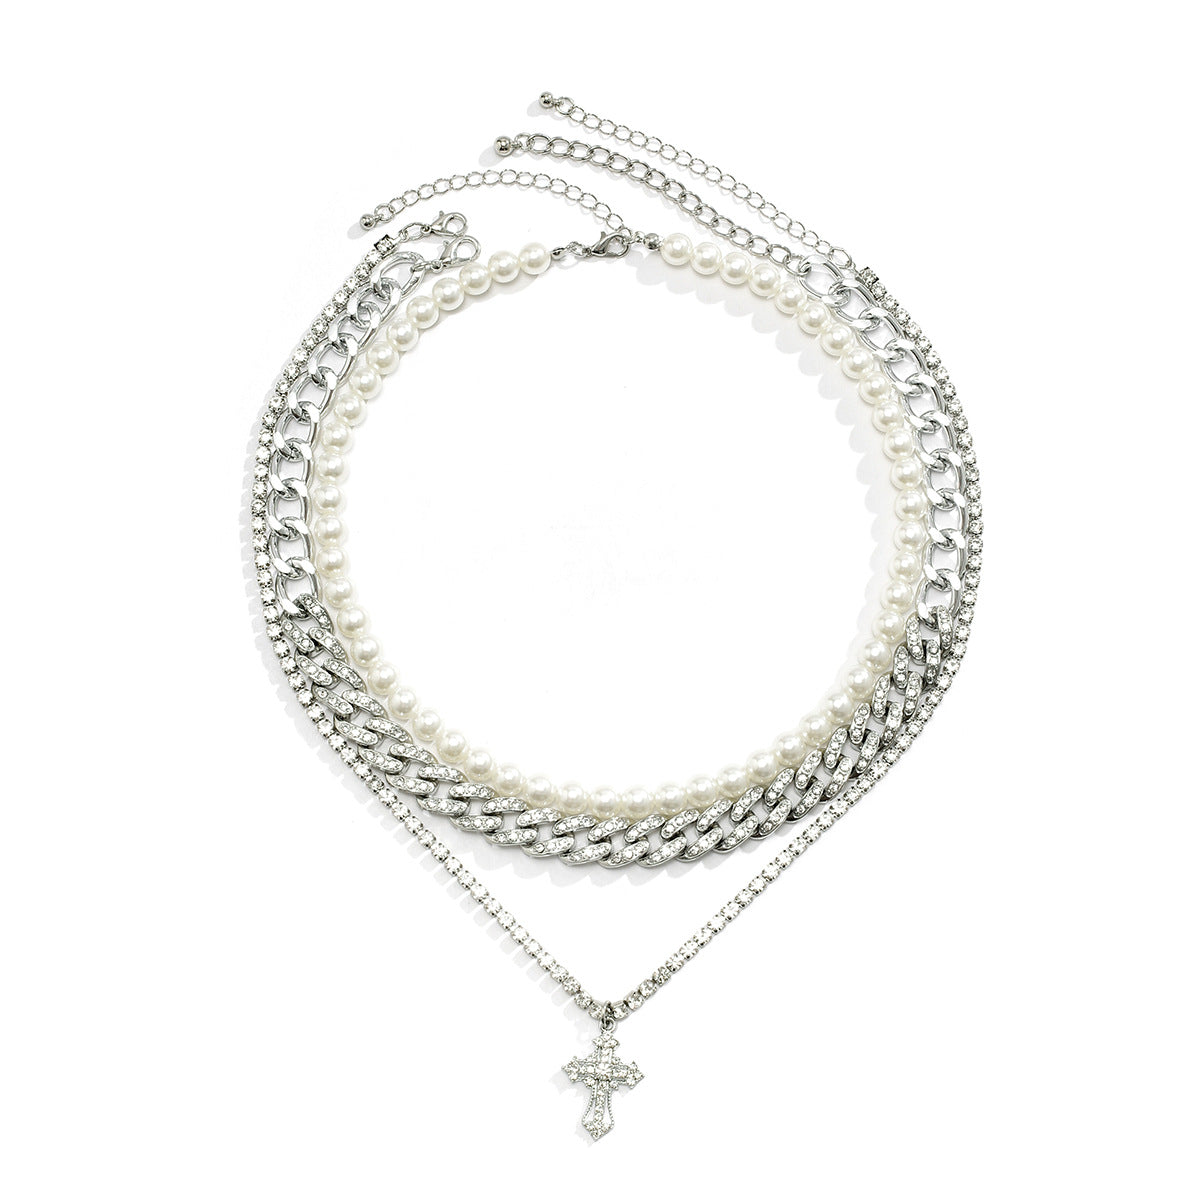 Trendy and fashionable pearls with Cuban chain and cross-studded diamond multi-layer design versatile necklace - Syble's